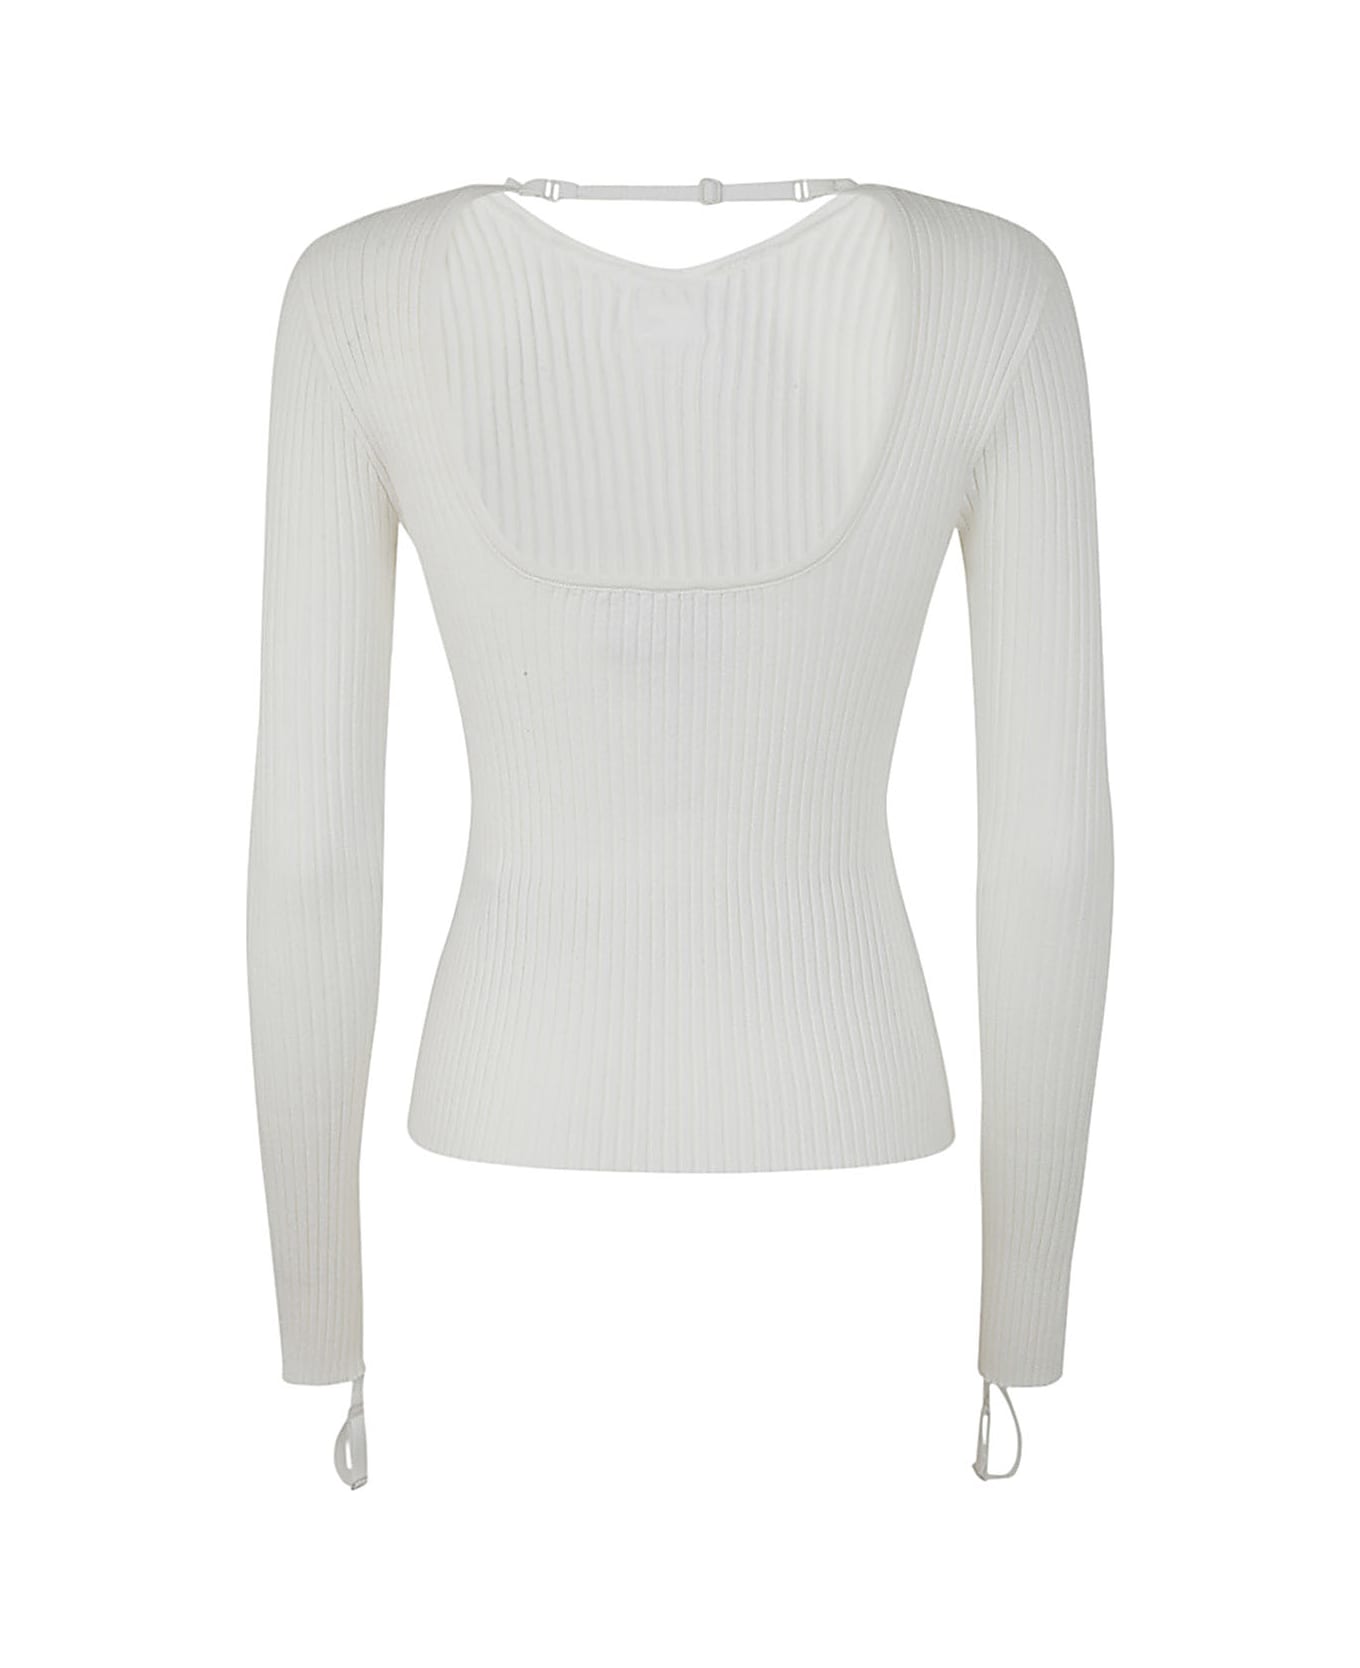 Courrèges Elastic Wrists Rib Knit Sweater - Heritage White